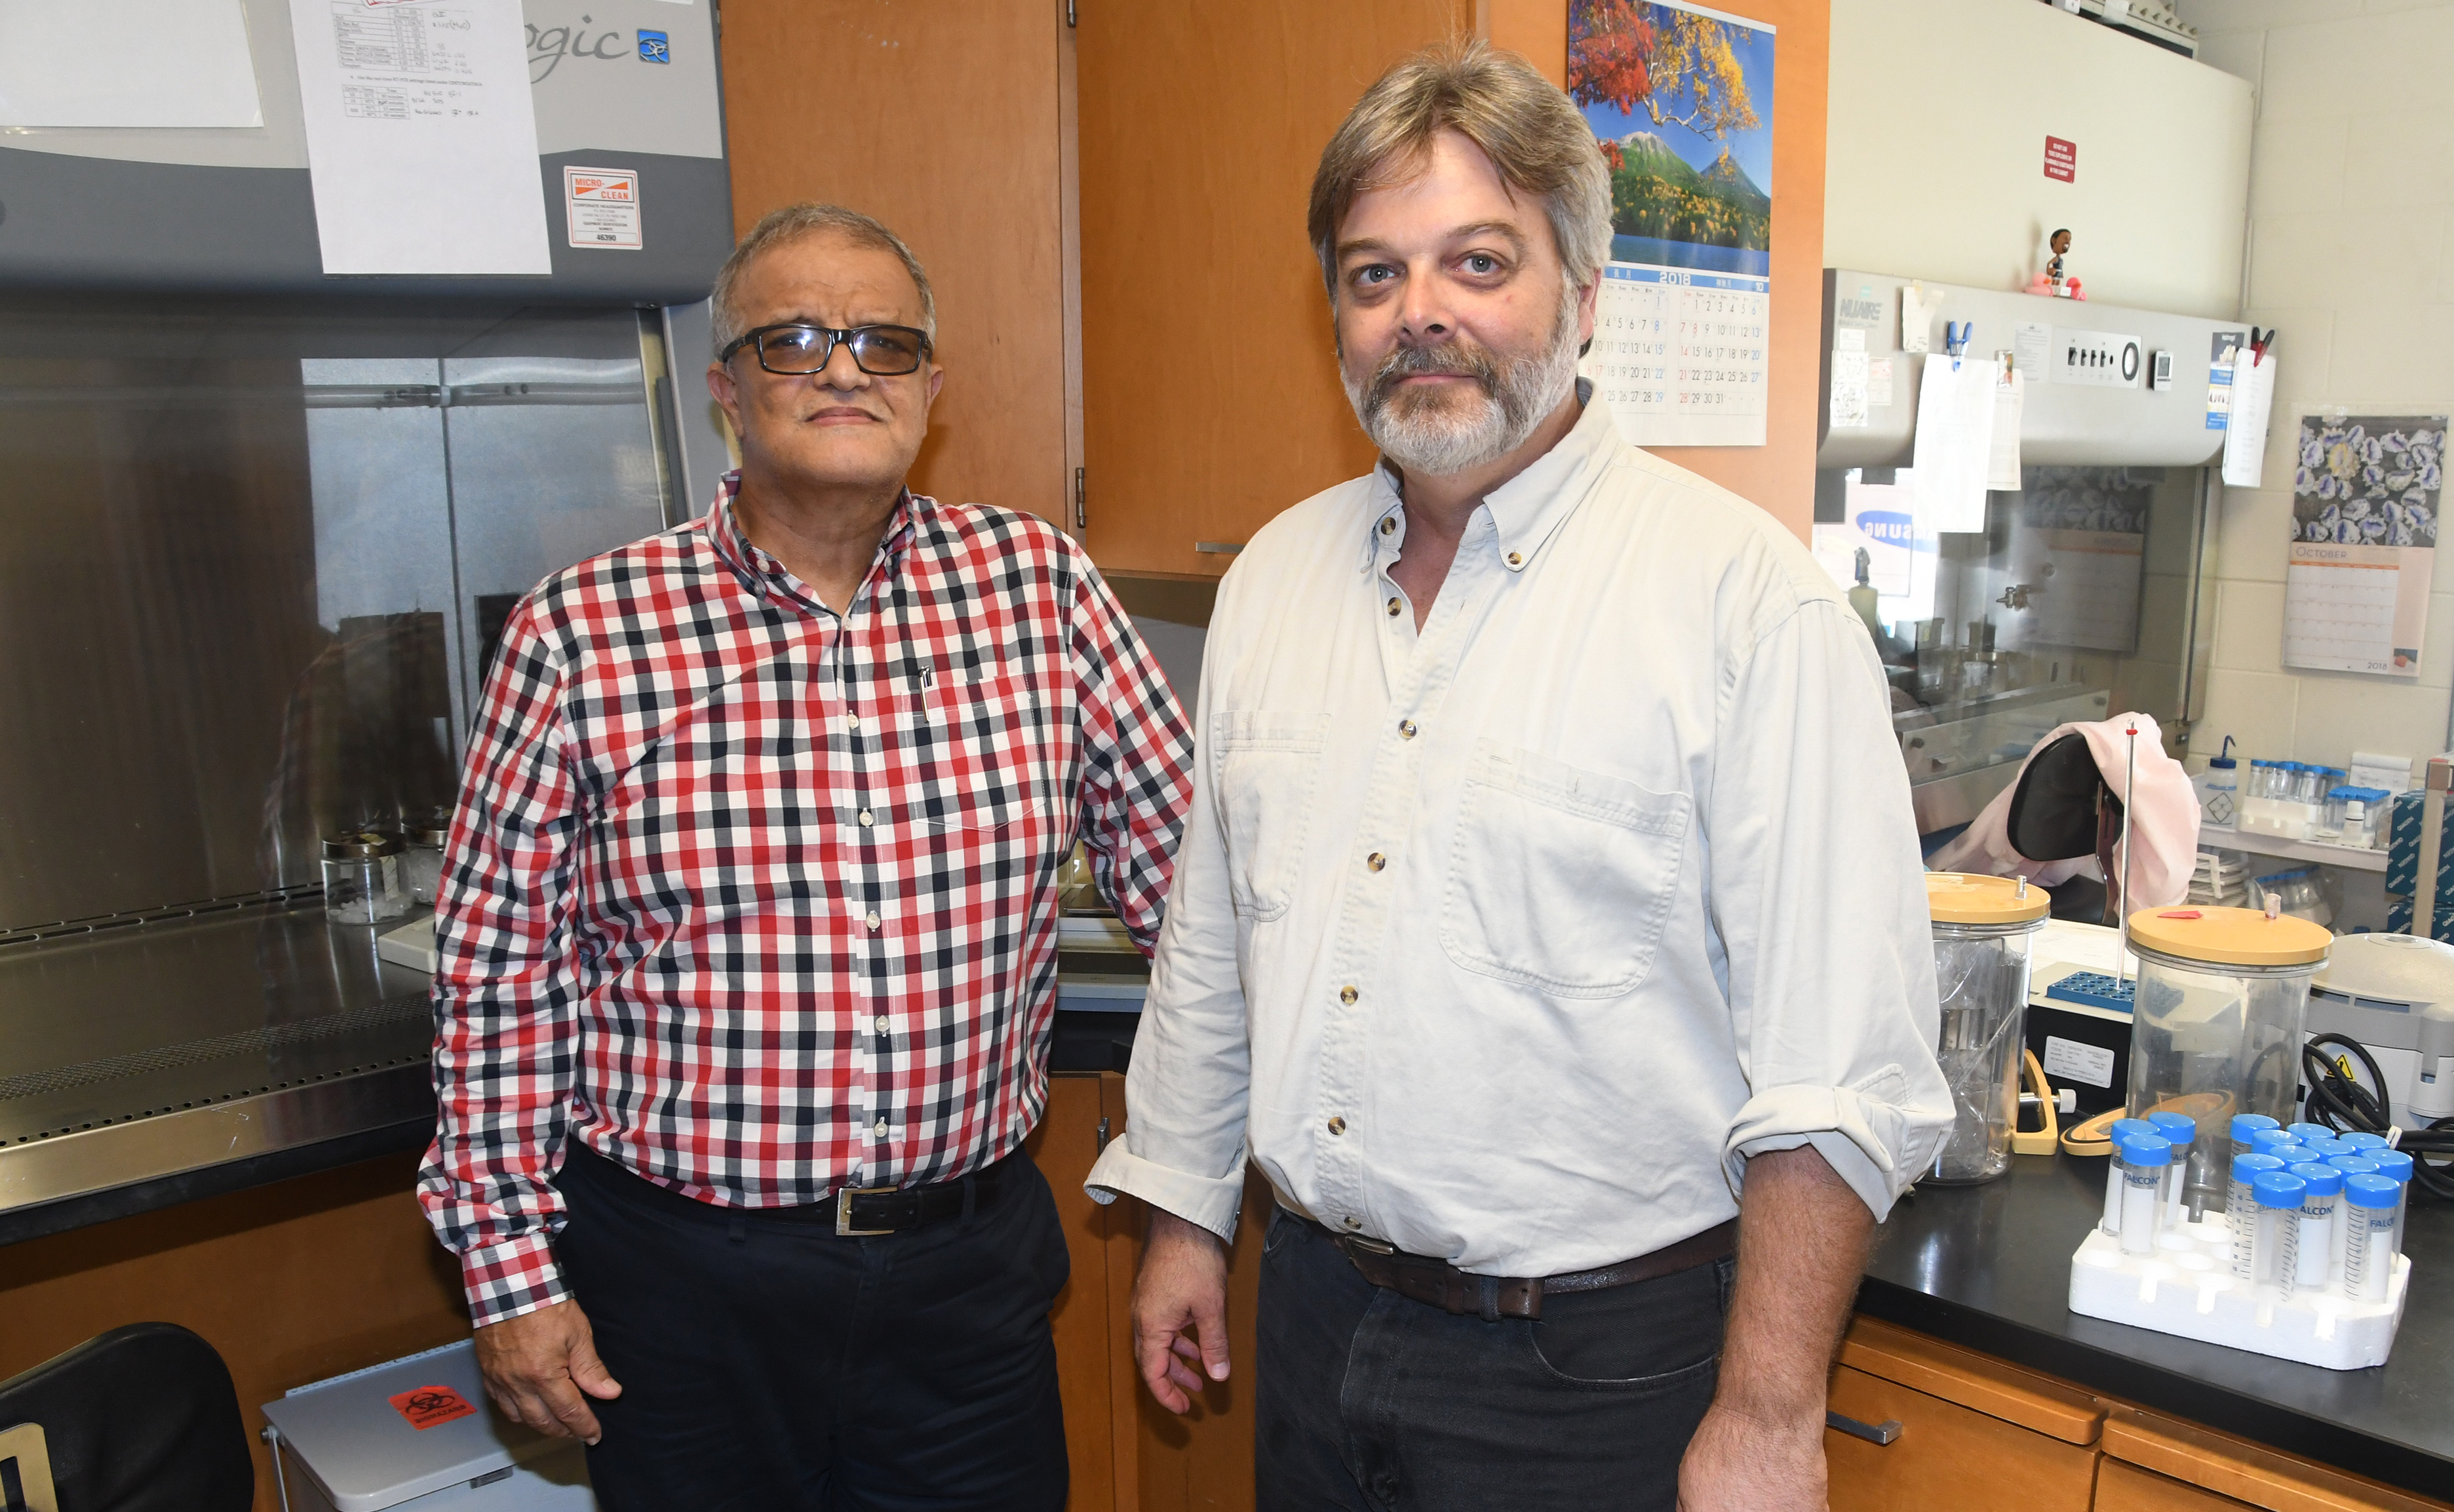 DSU awarded almost $500,000 research grant for laser project